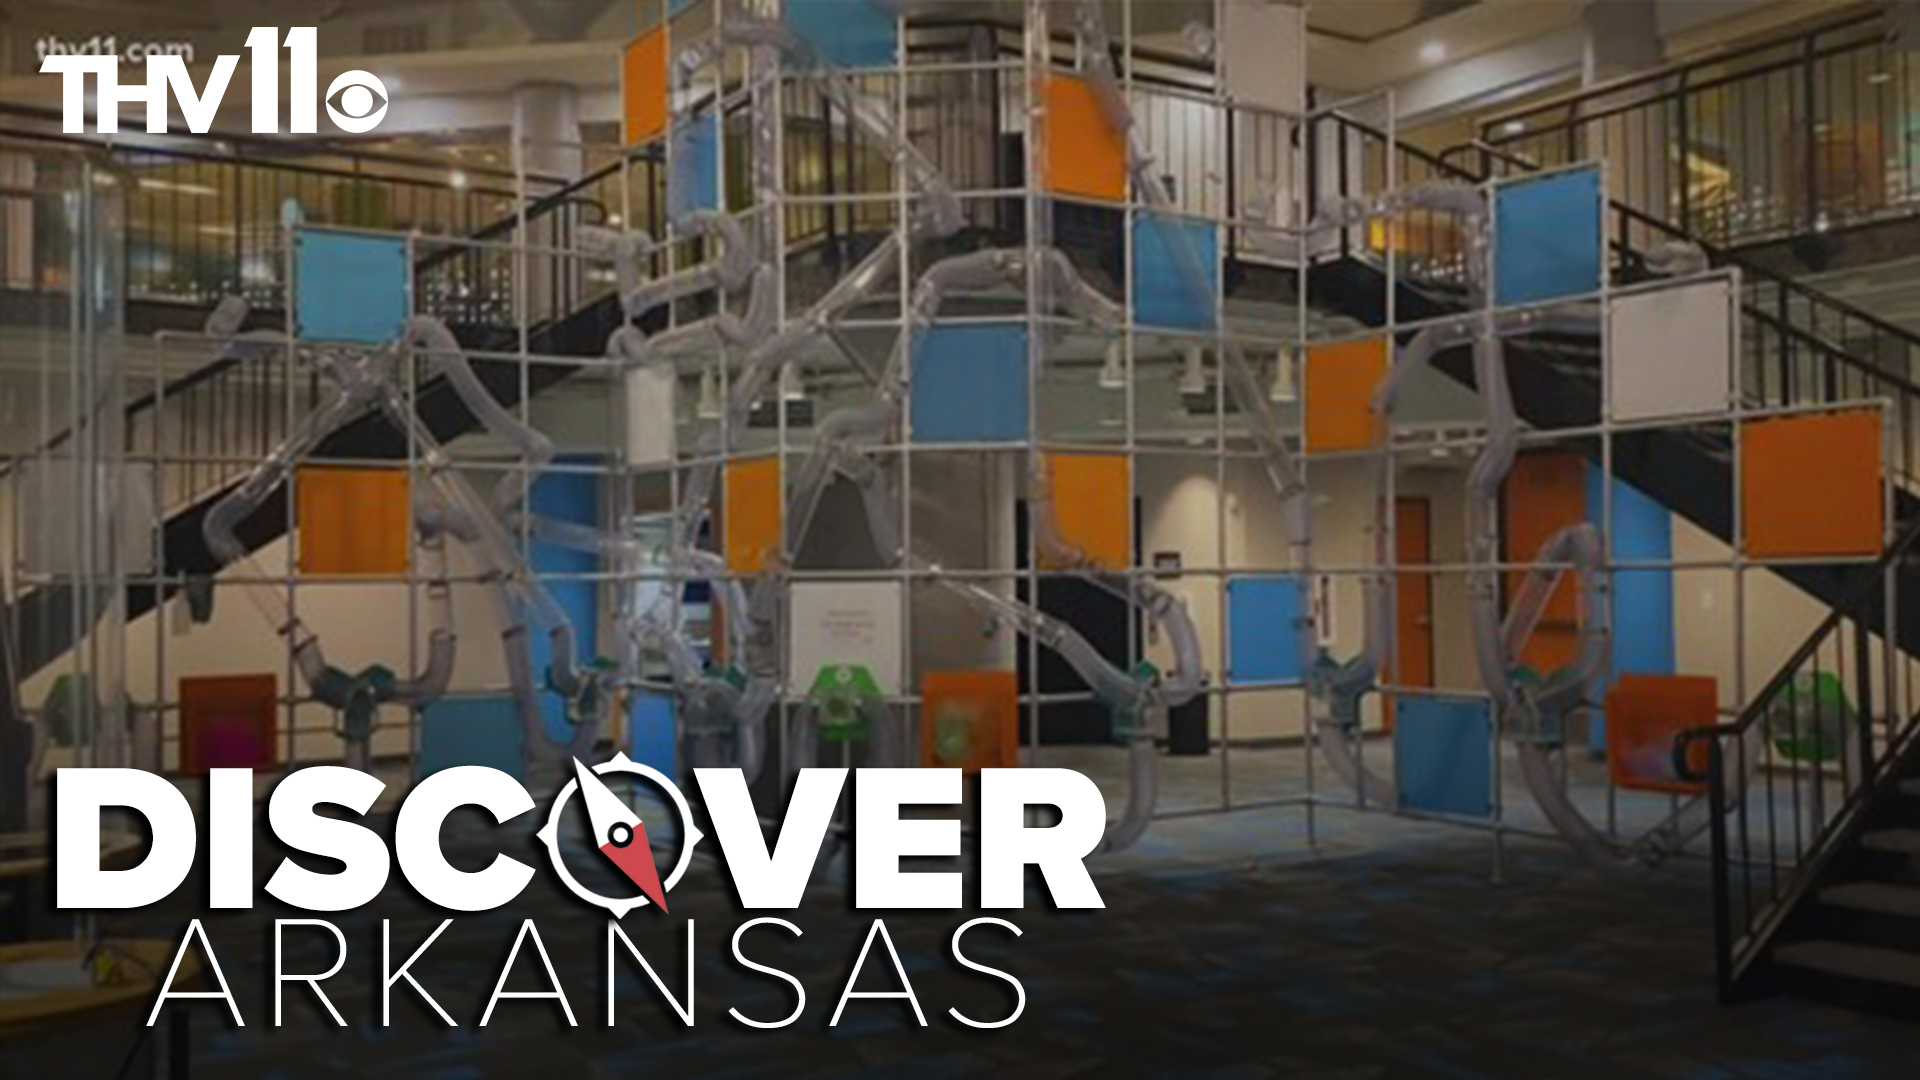 The Museum of Discovery was forced to close their doors due to damages caused by frozen pipes. Six months later, the science center is set for a grand reopening!